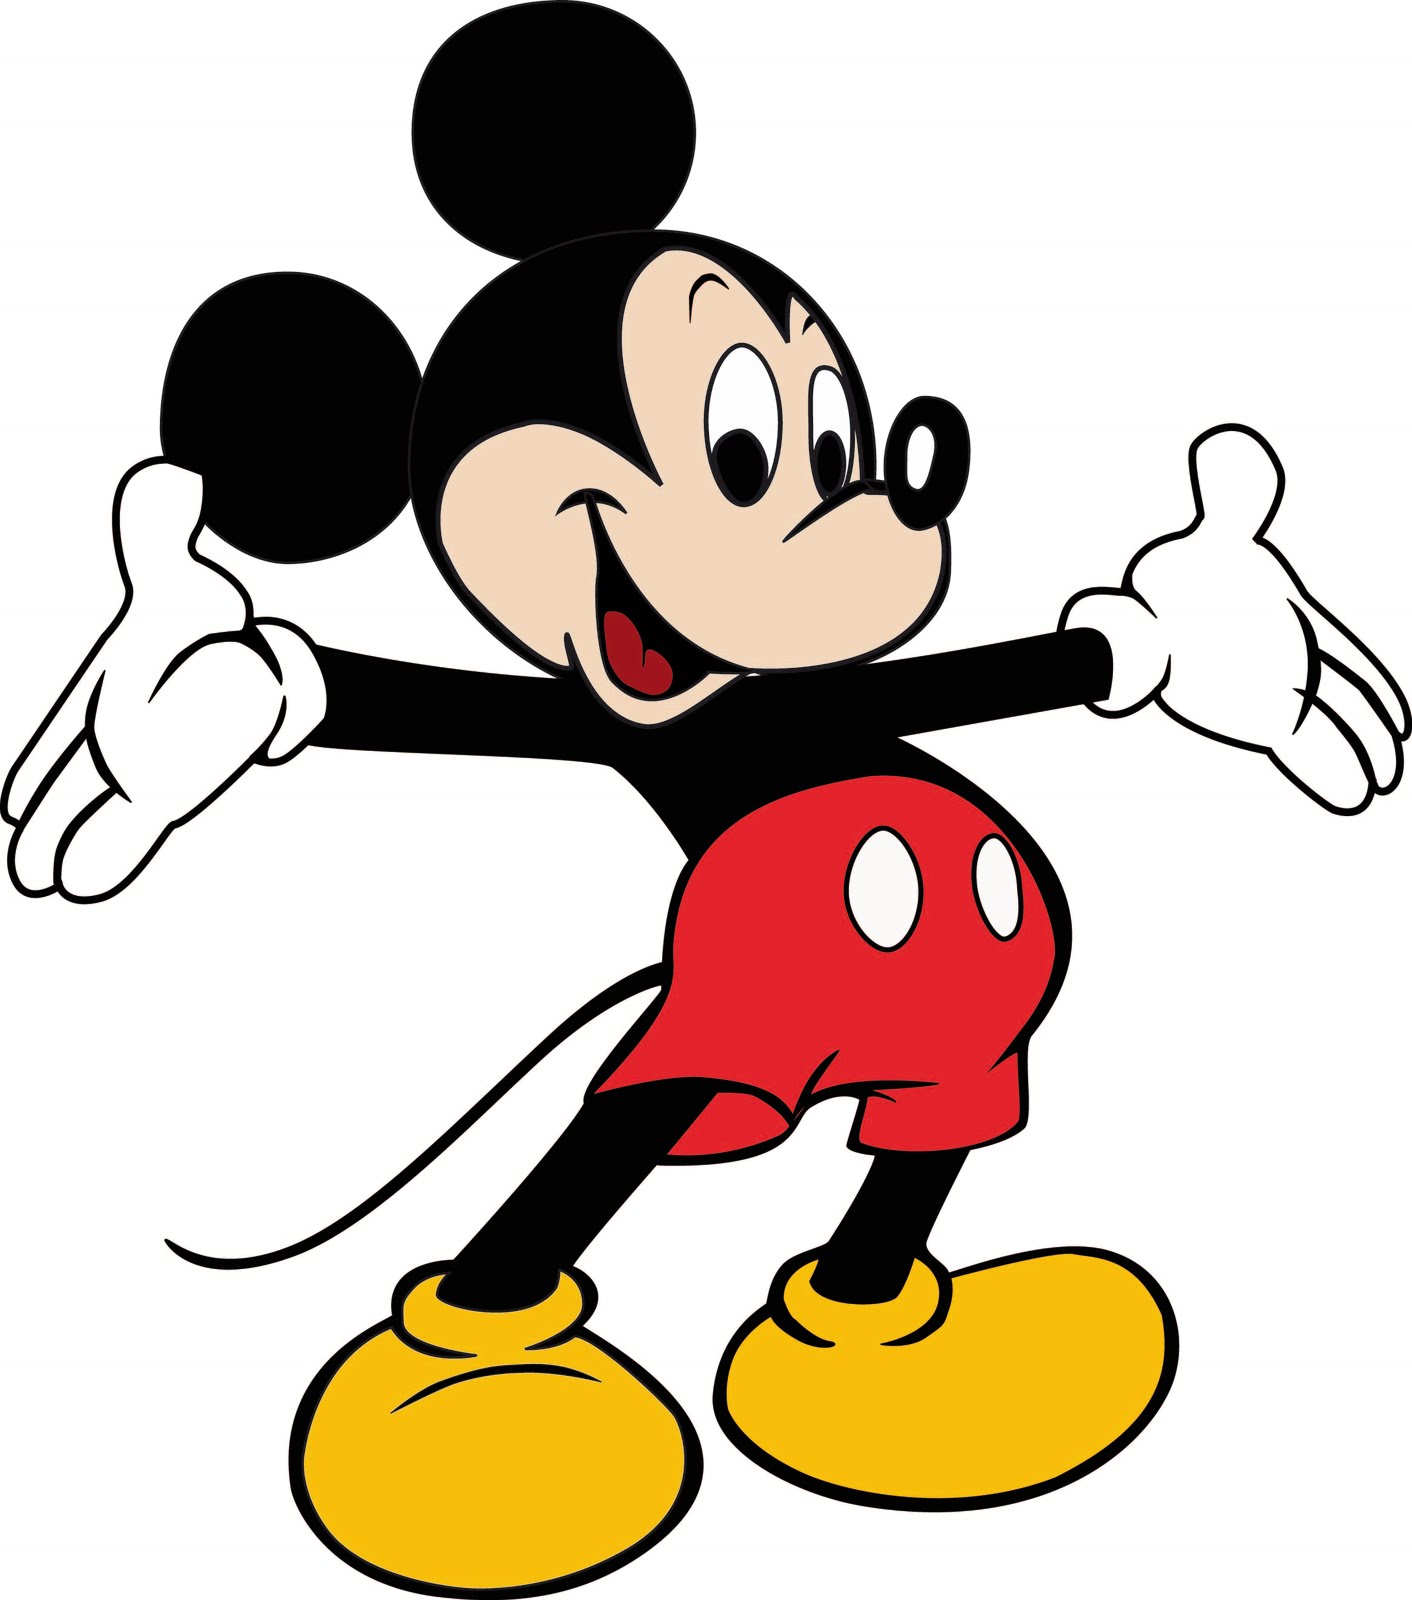 Mickey Mouse Cartoon Pic - ClipArt Best